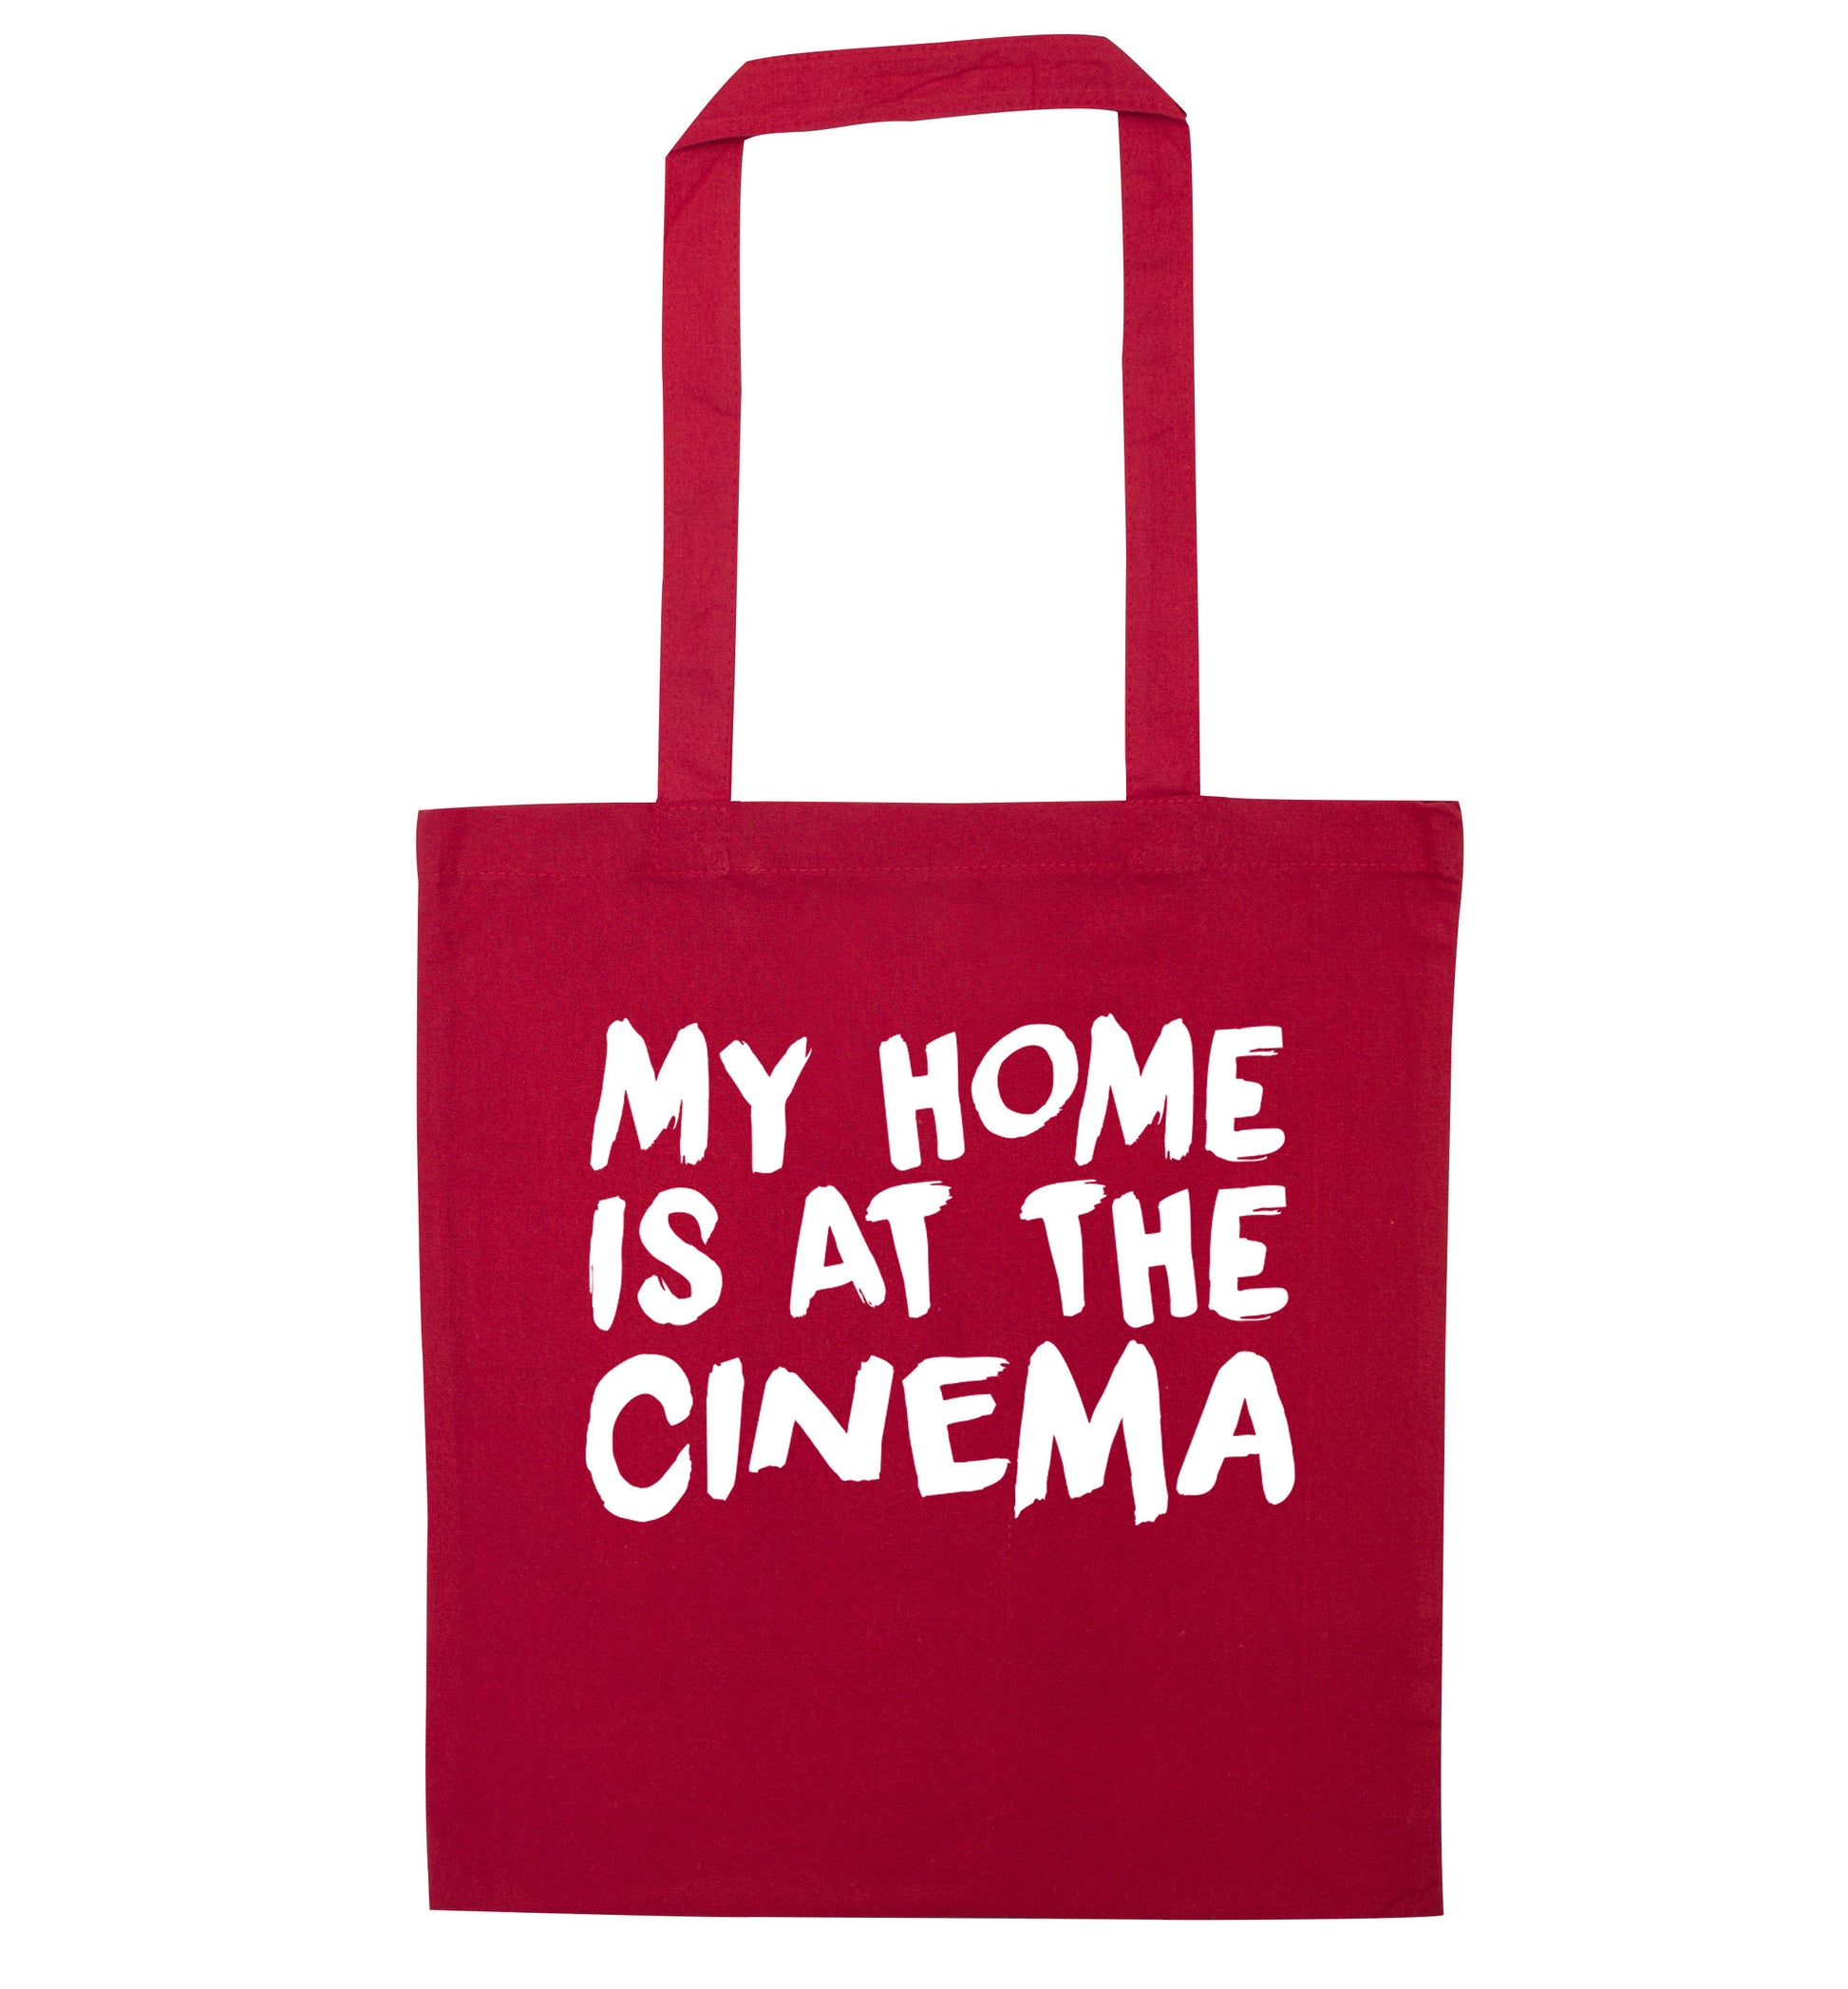 My home is at the cinema red tote bag